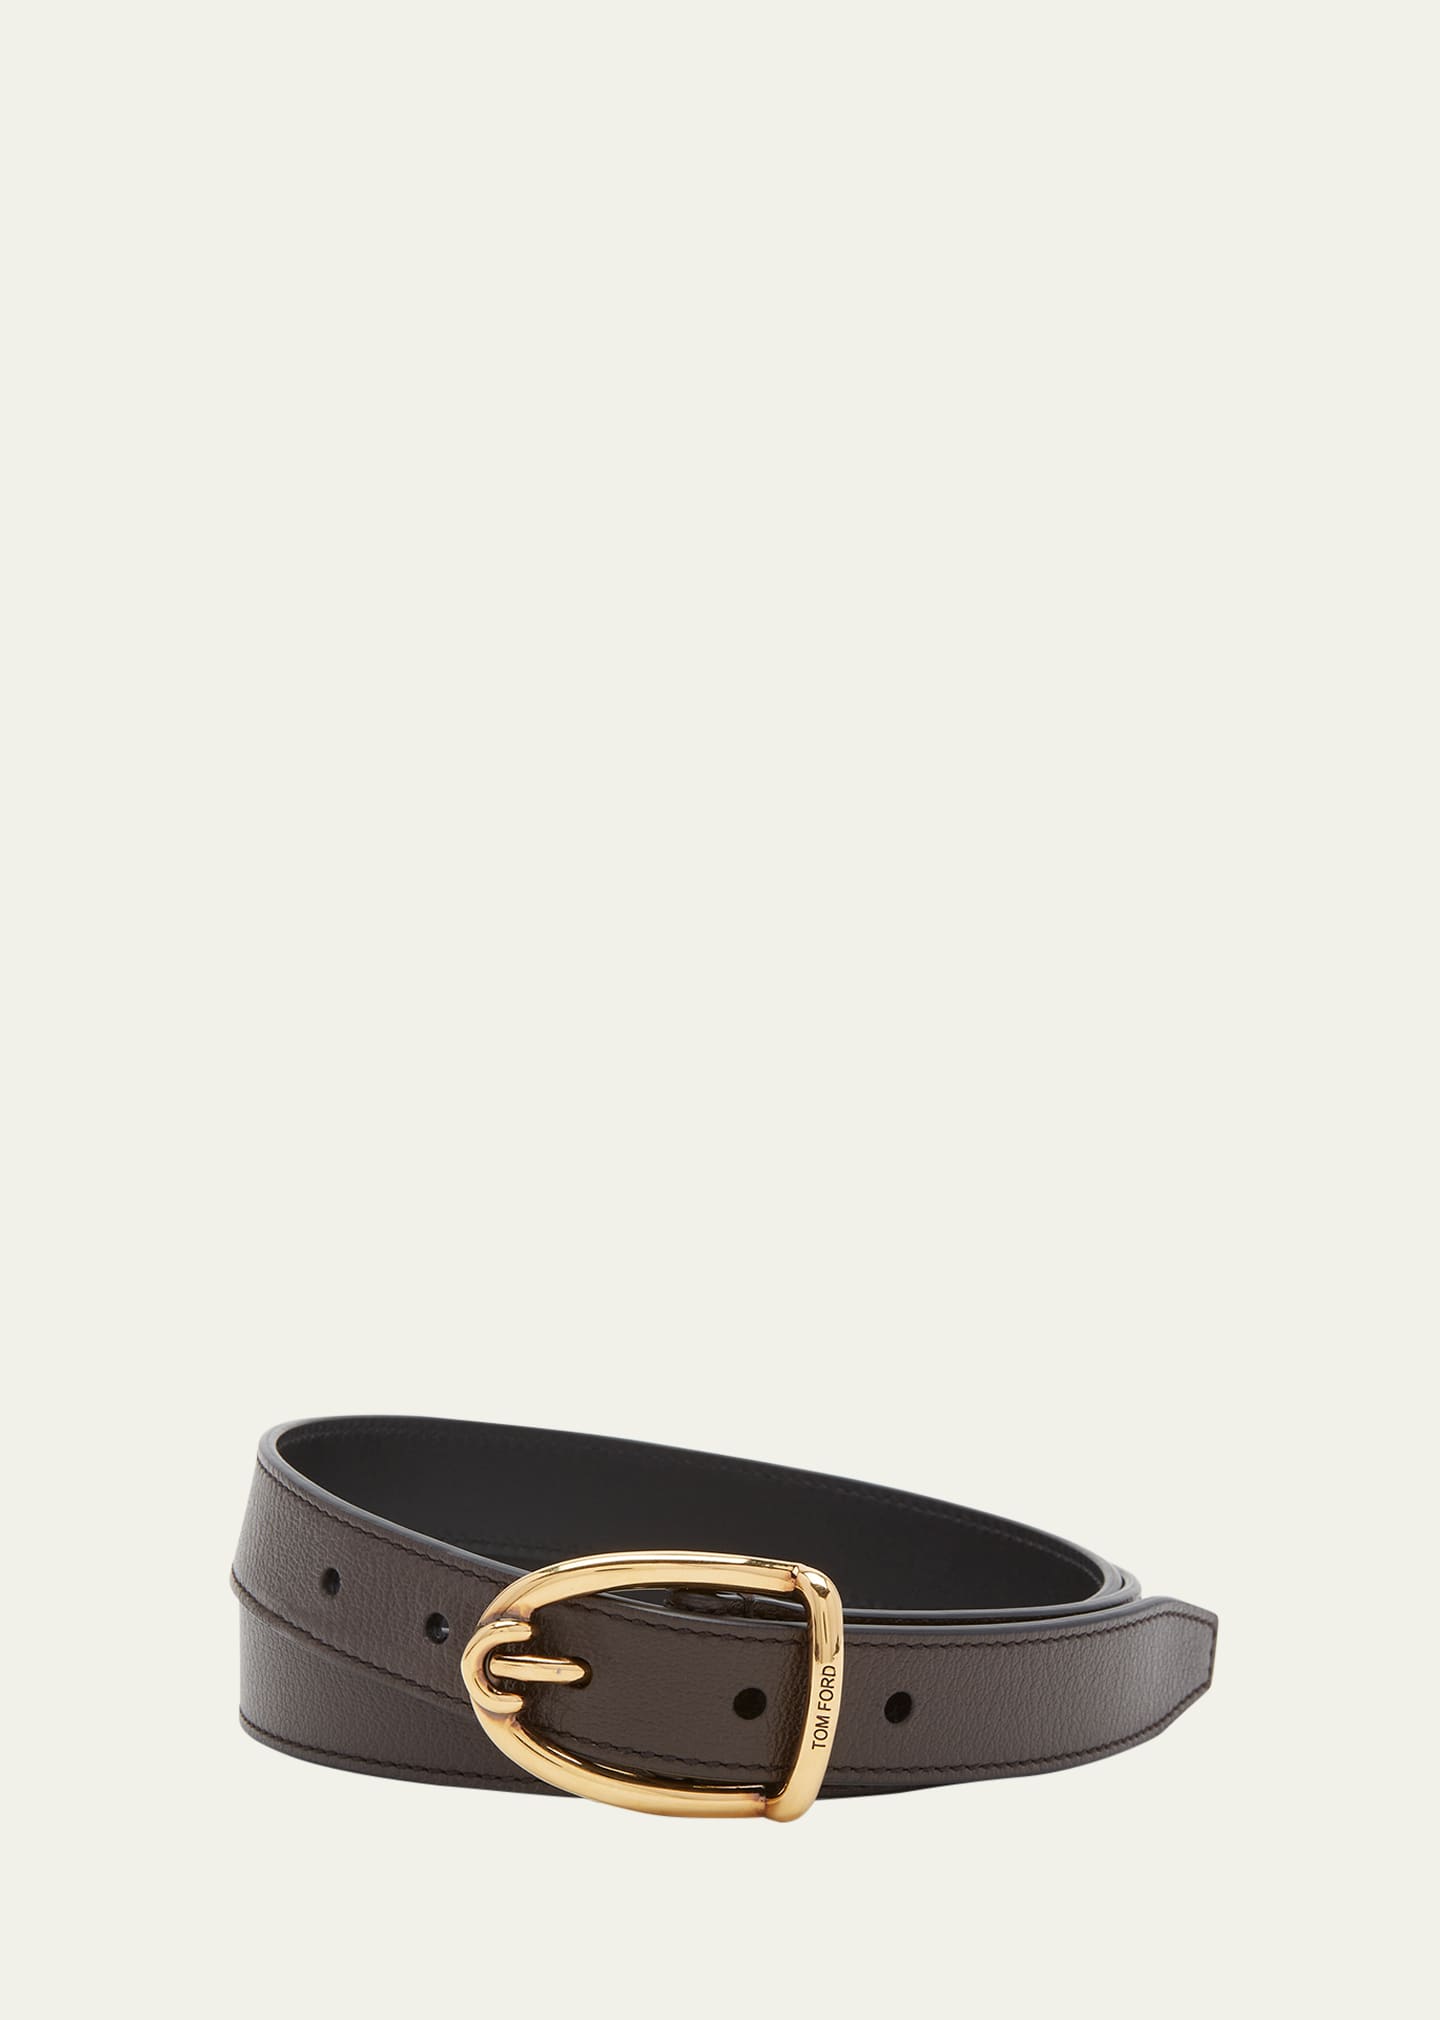 Tom Ford Men's Goat Leather Angled-buckle Belt In 1b051 Chocolate